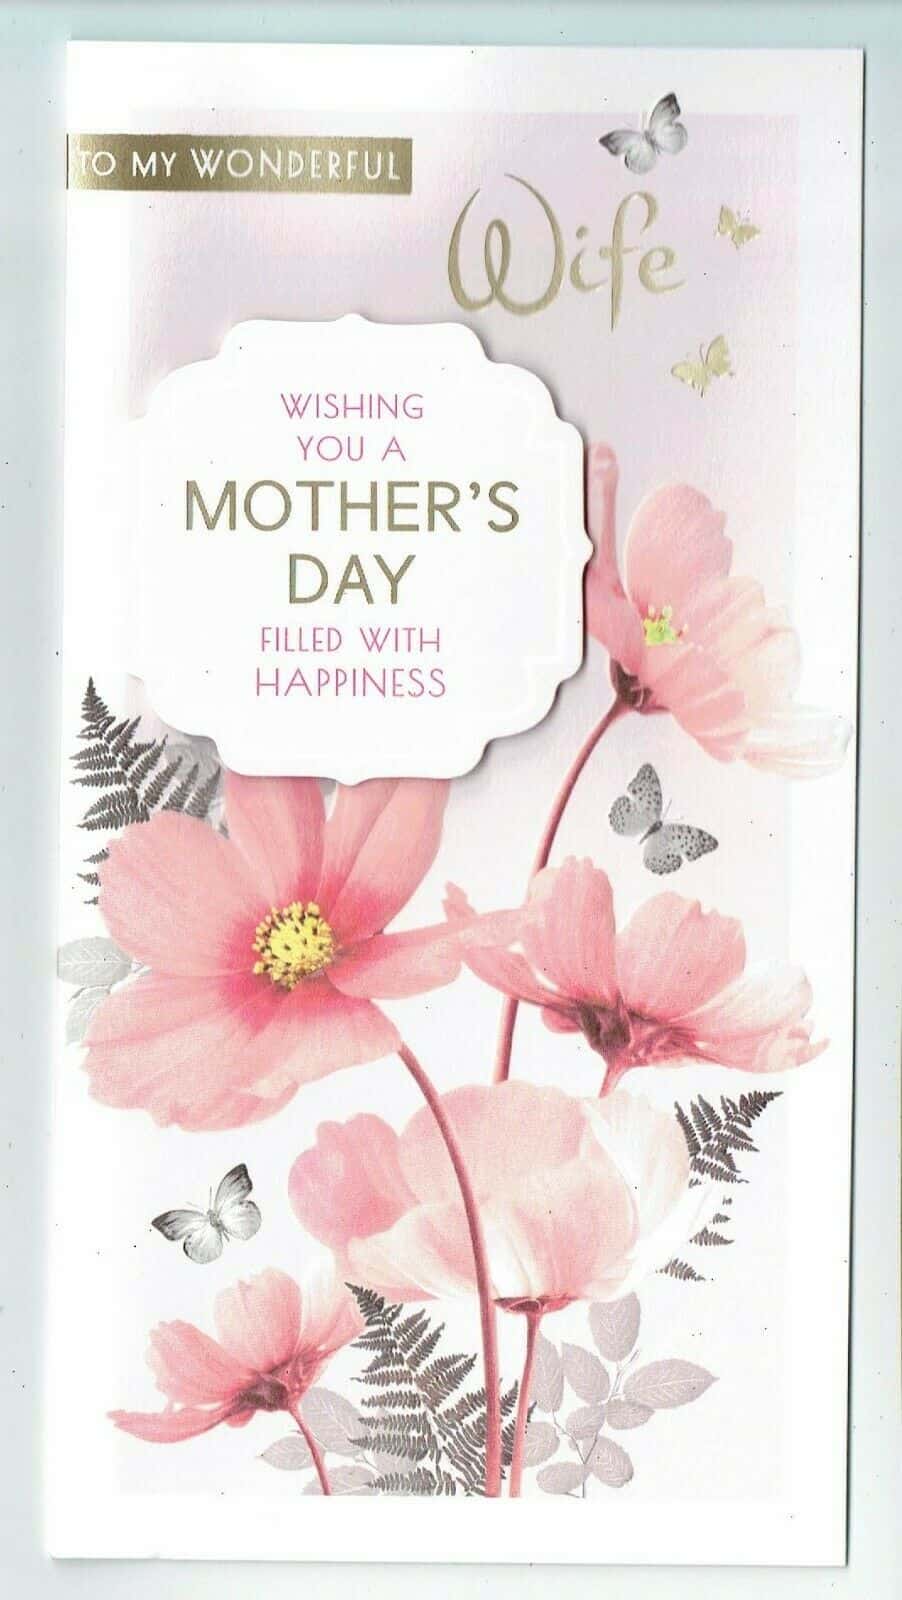 Wife Mothers Day Card To My Wonderful Wife With Flowers Design With